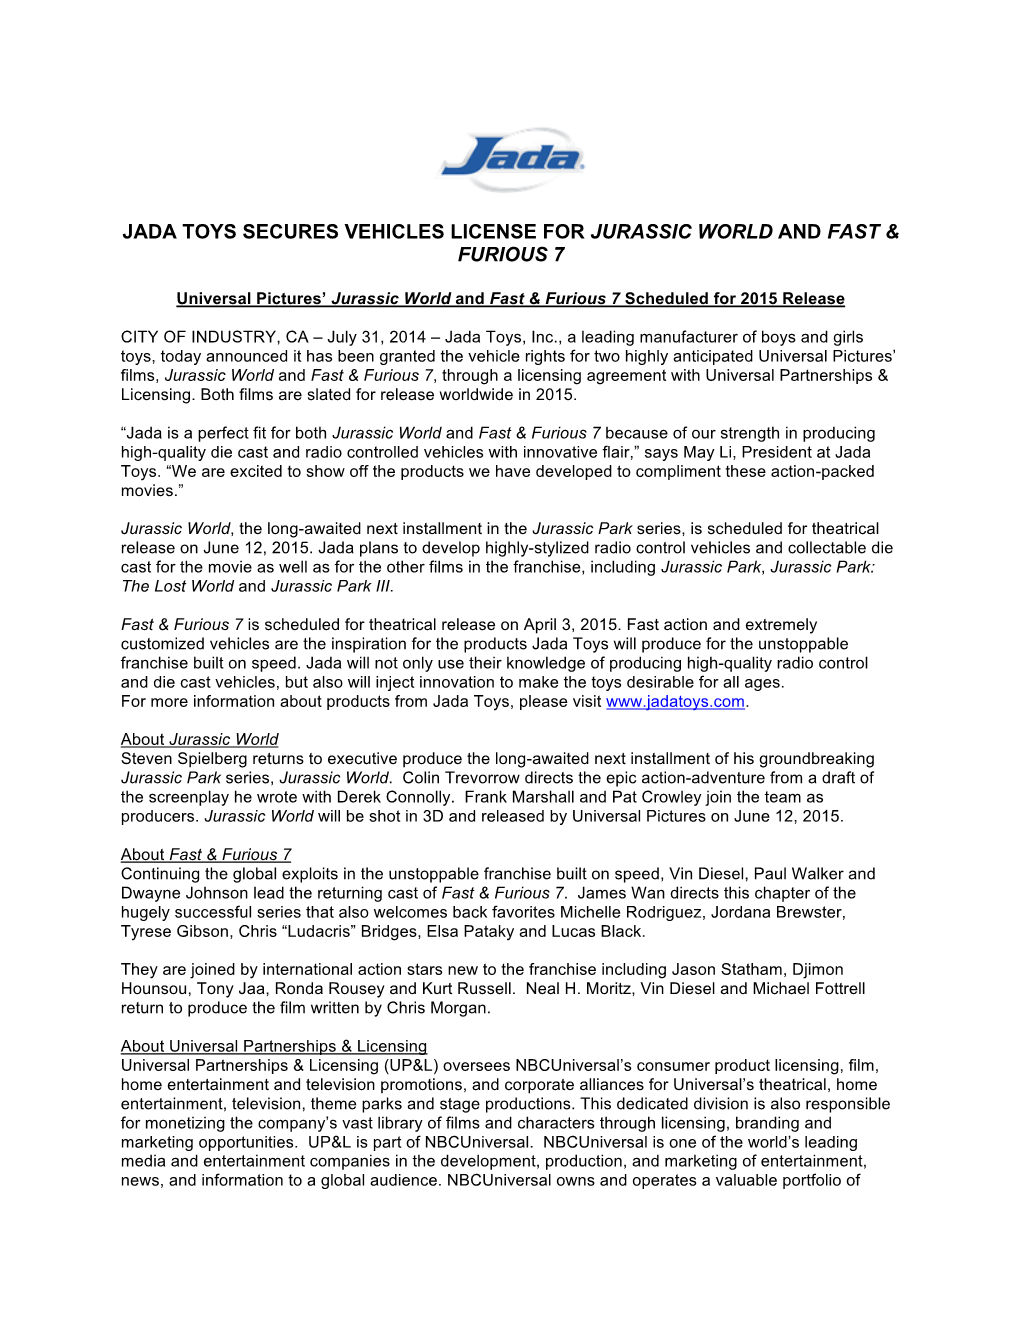 Jada Toys Secures Vehicles License for Jurassic World and Fast & Furious 7